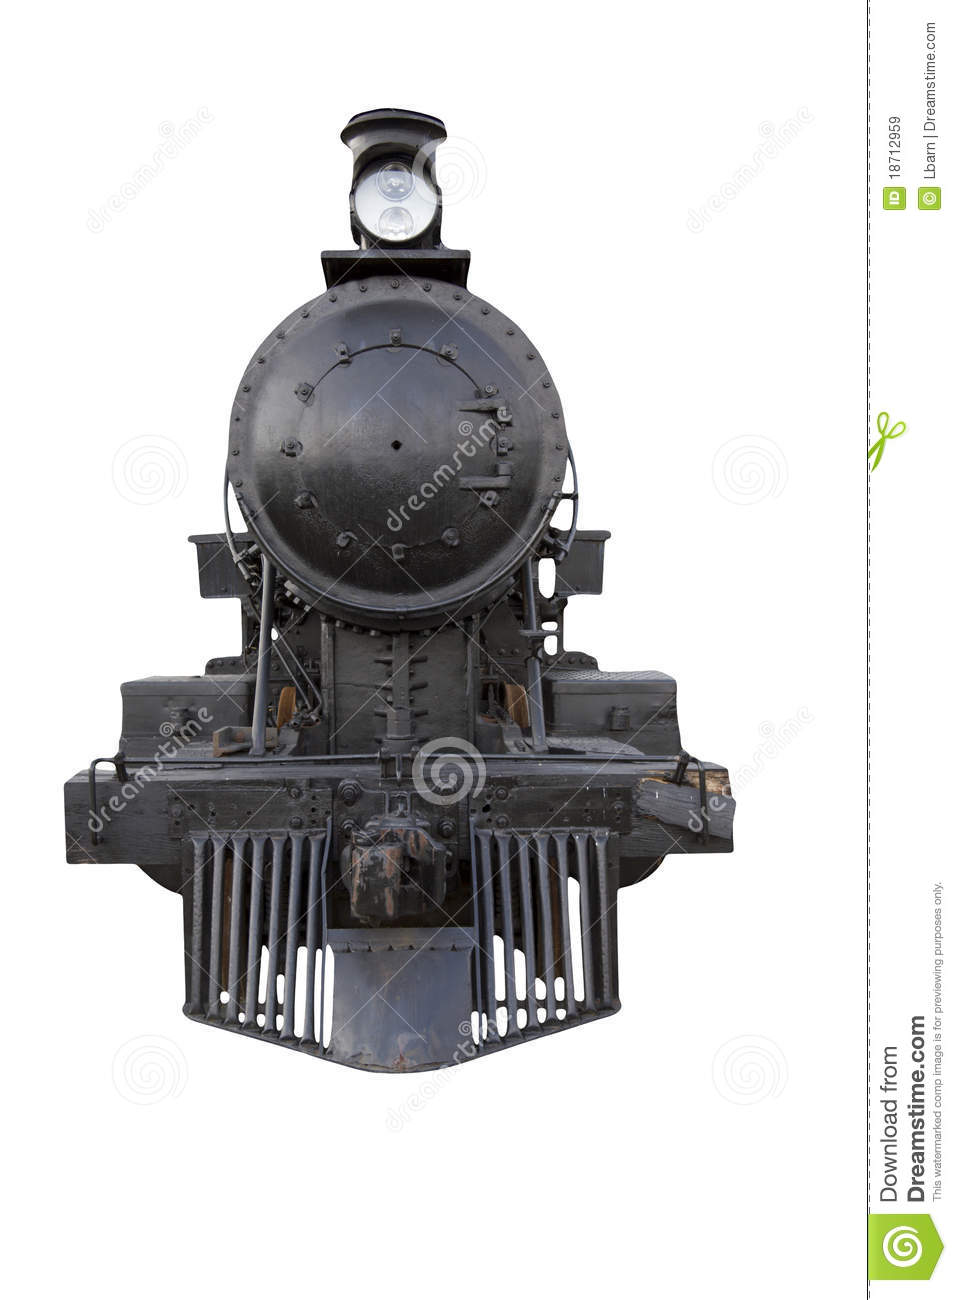 Steam Engine Front Royalty Free Stock Images   Image  18712959